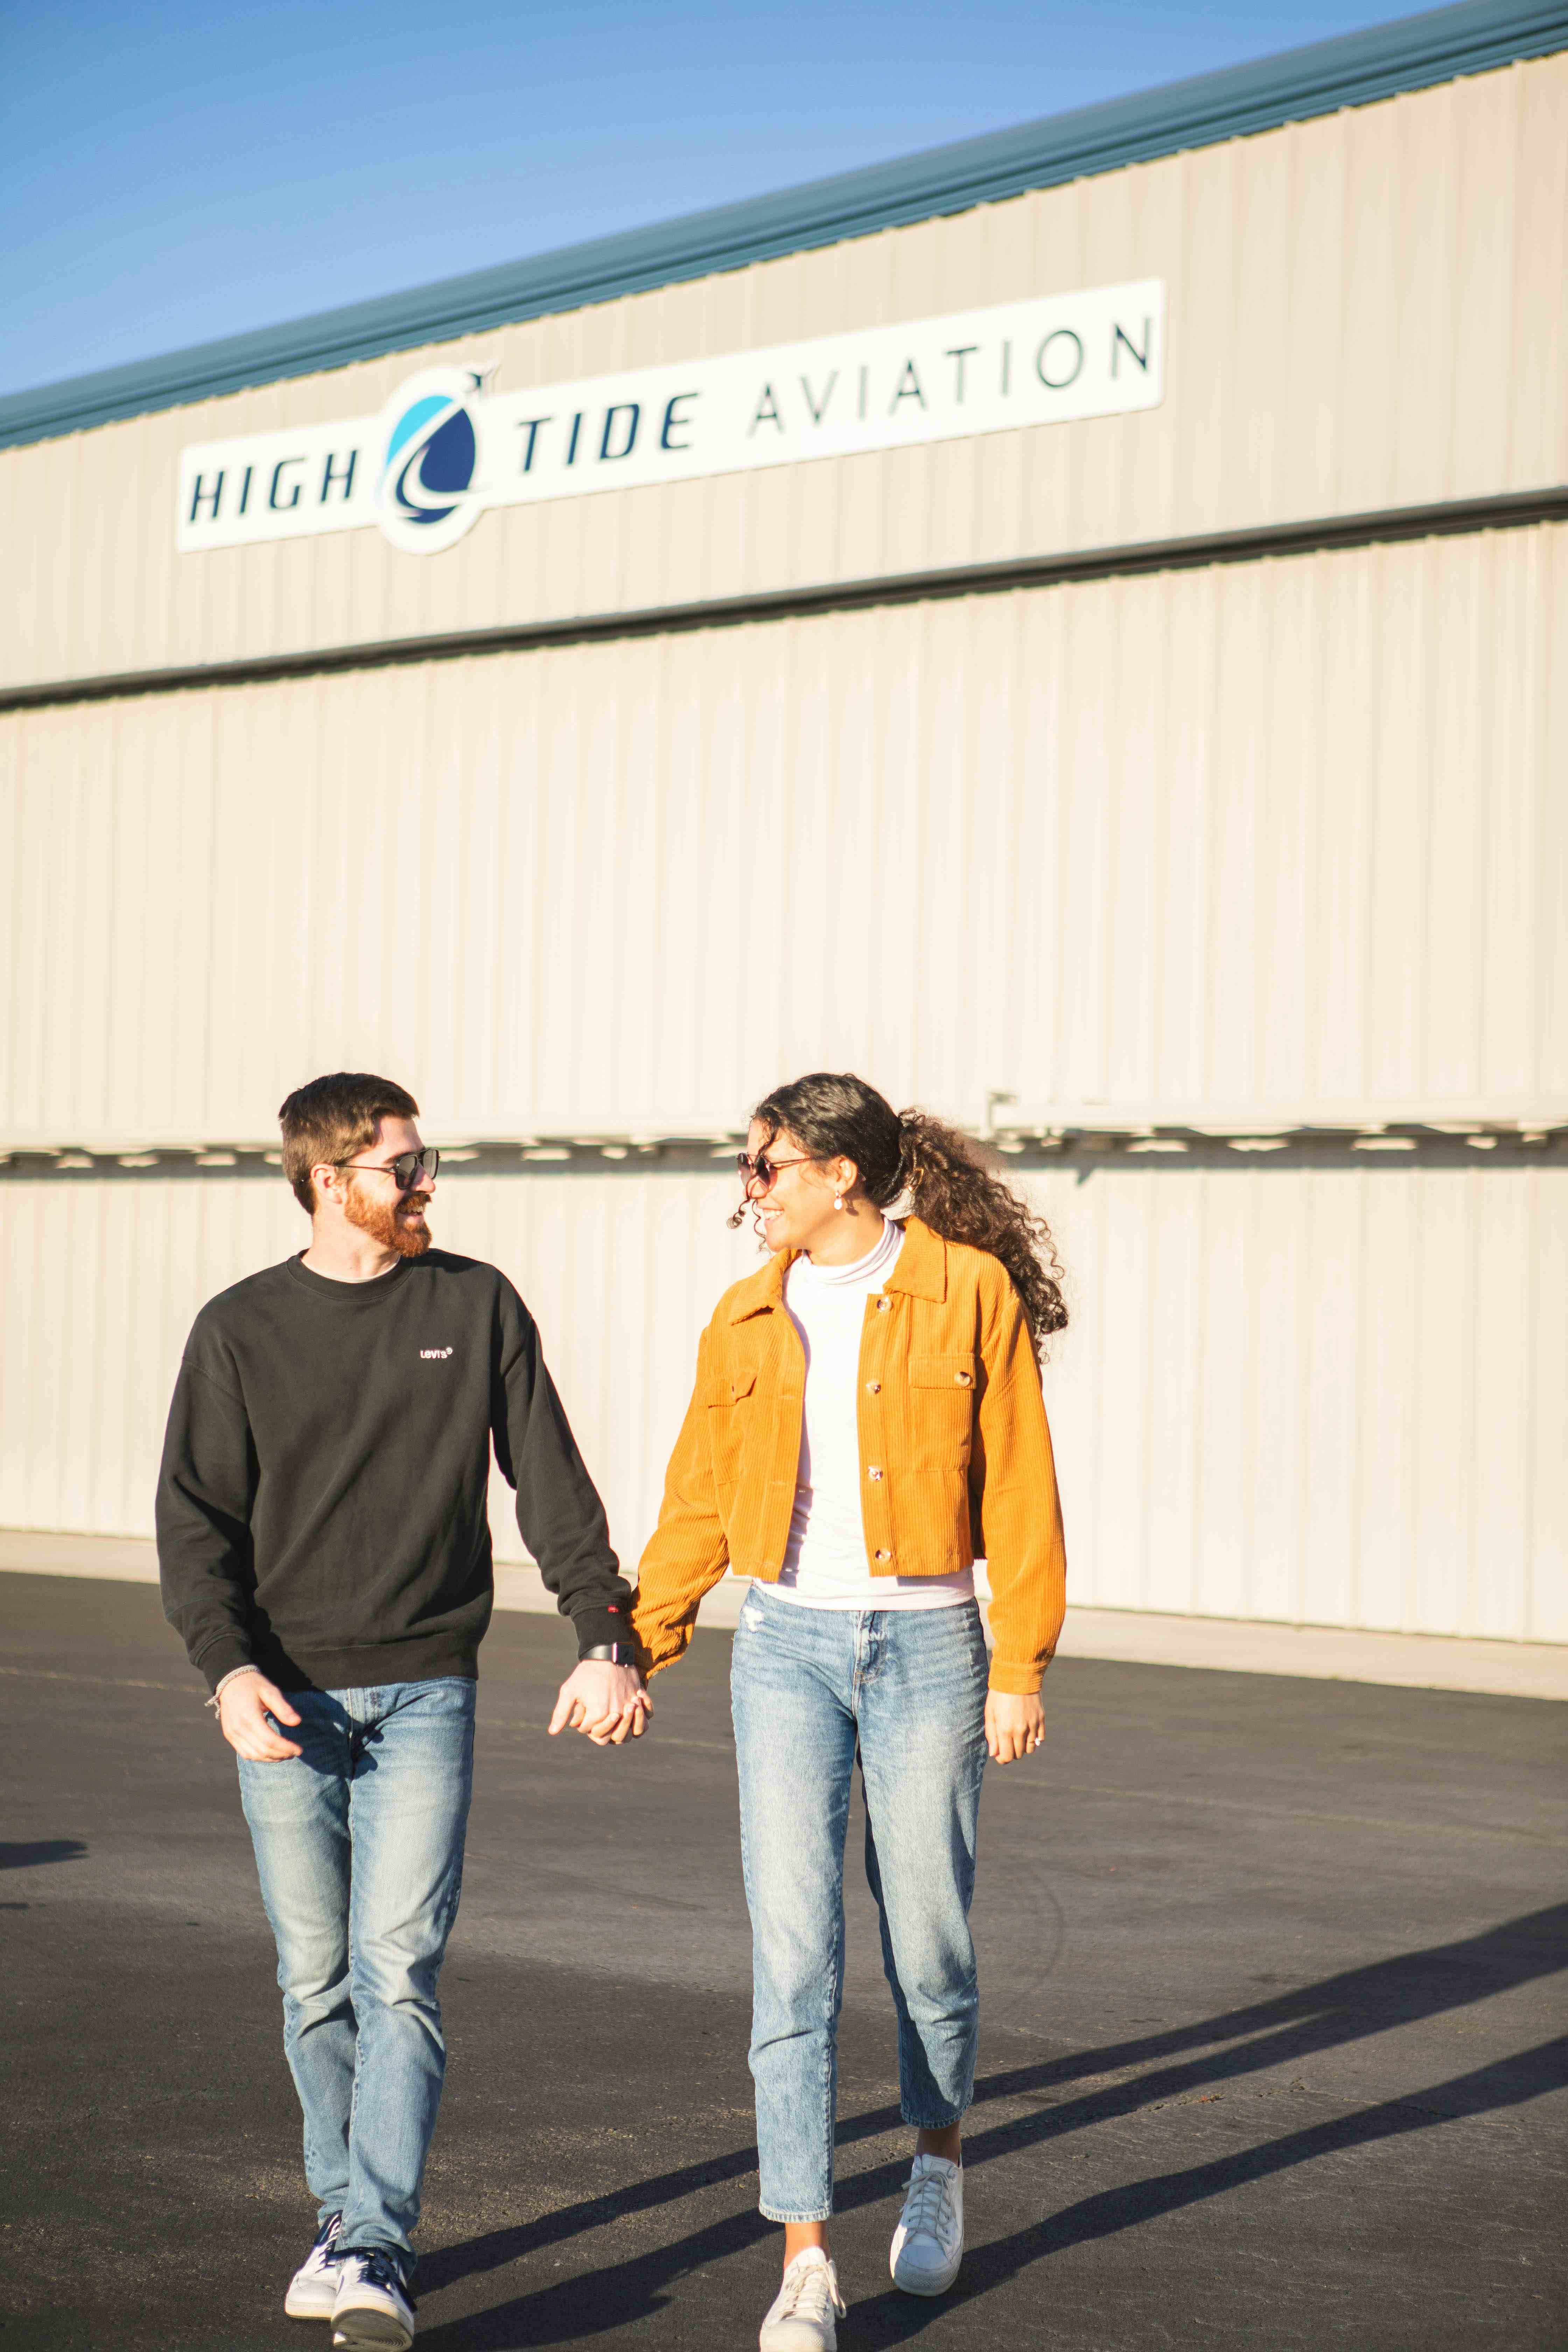 Couple visiting High Tide Aviation